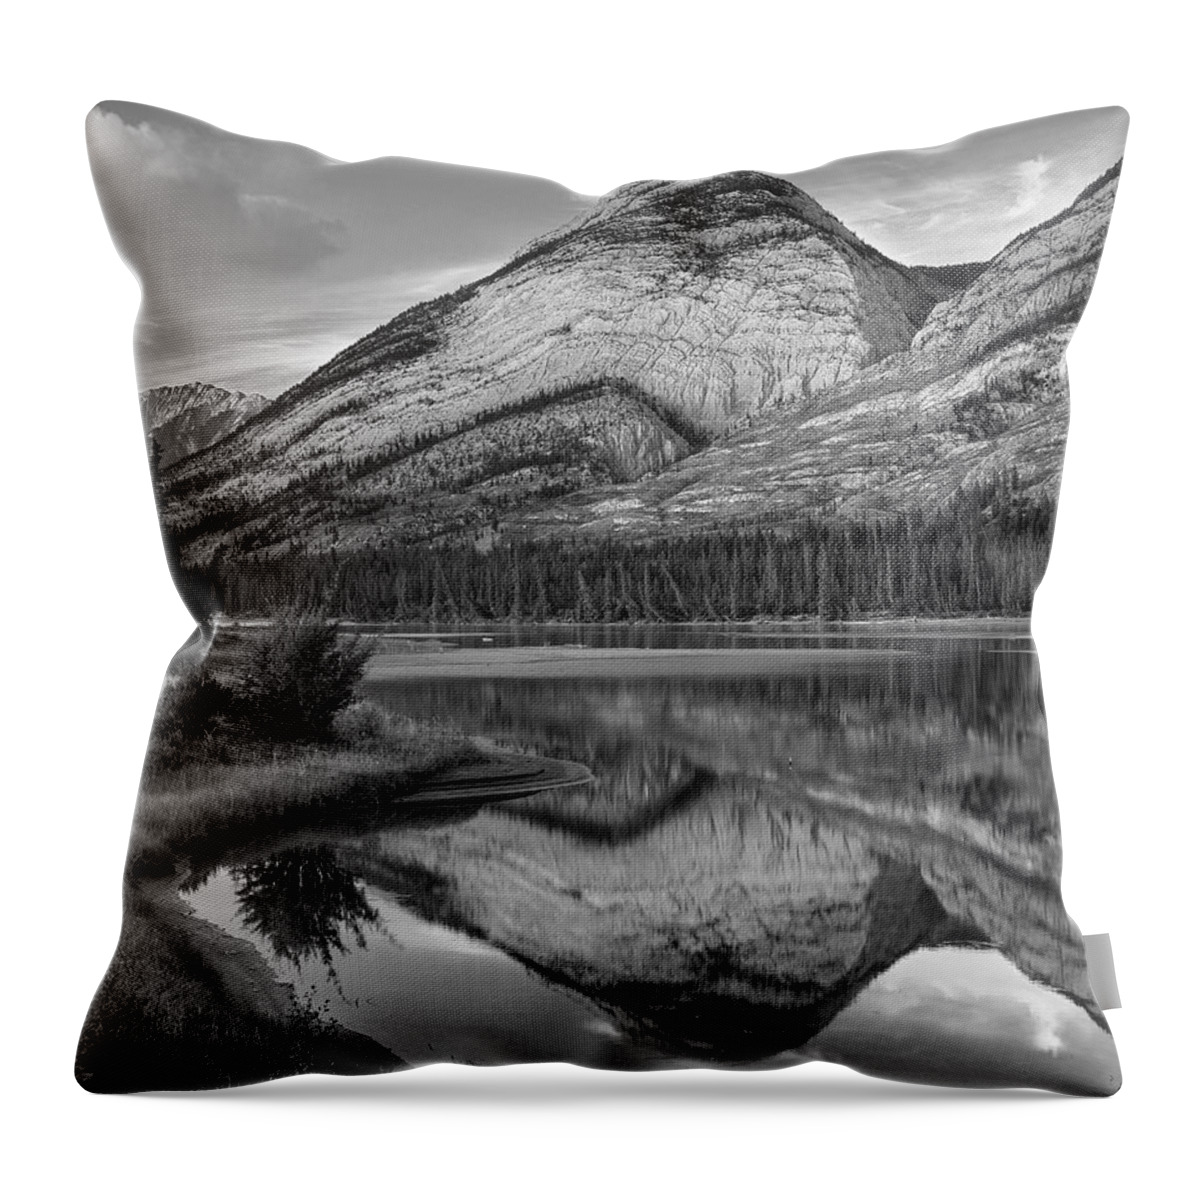 Disk1215 Throw Pillow featuring the photograph Colin Range And Athasca River Alberta by Tim Fitzharris